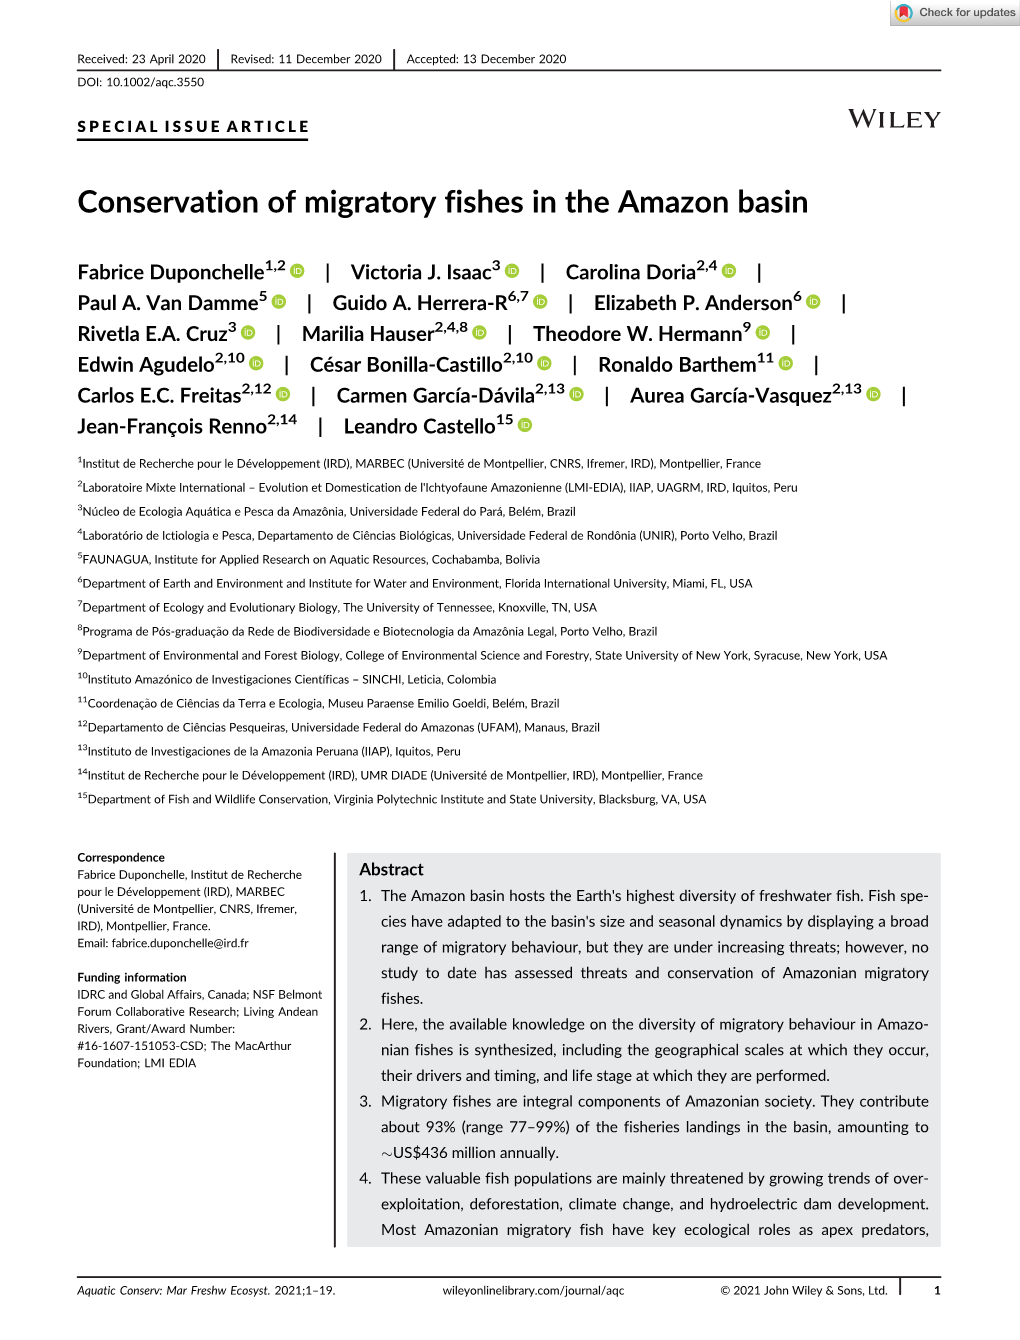 Conservation of Migratory Fishes in the Amazon Basin